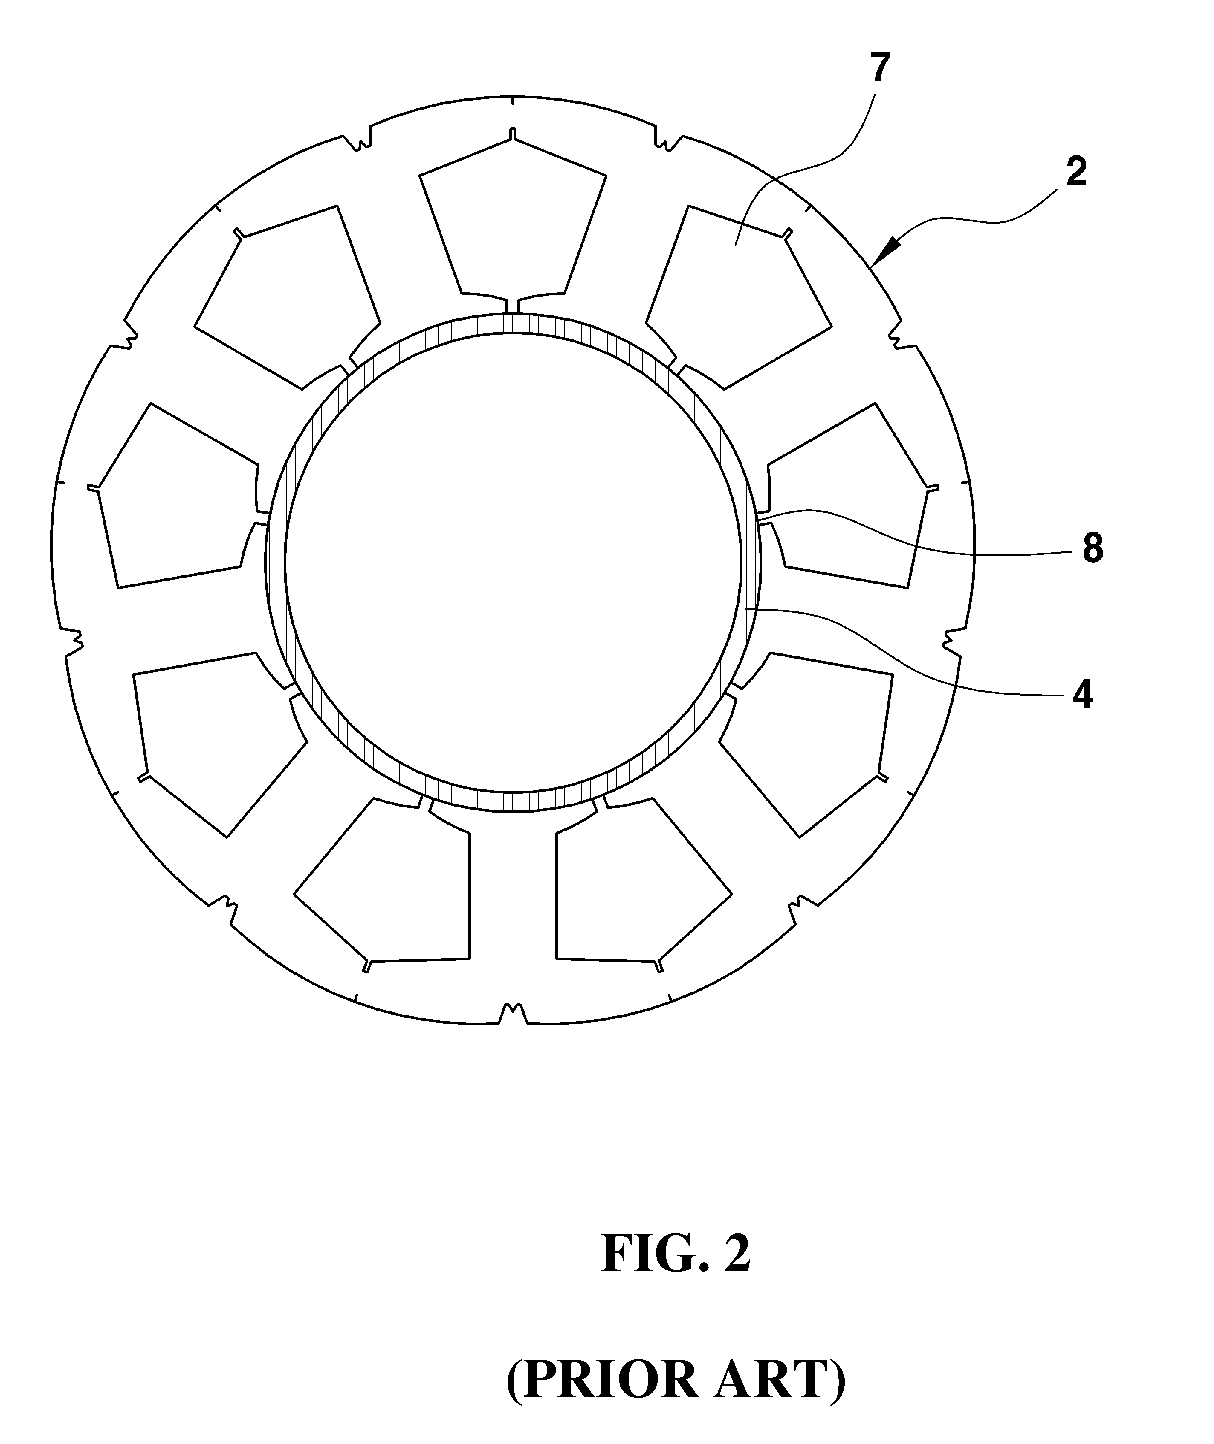 Canned motor for reducing cogging torque